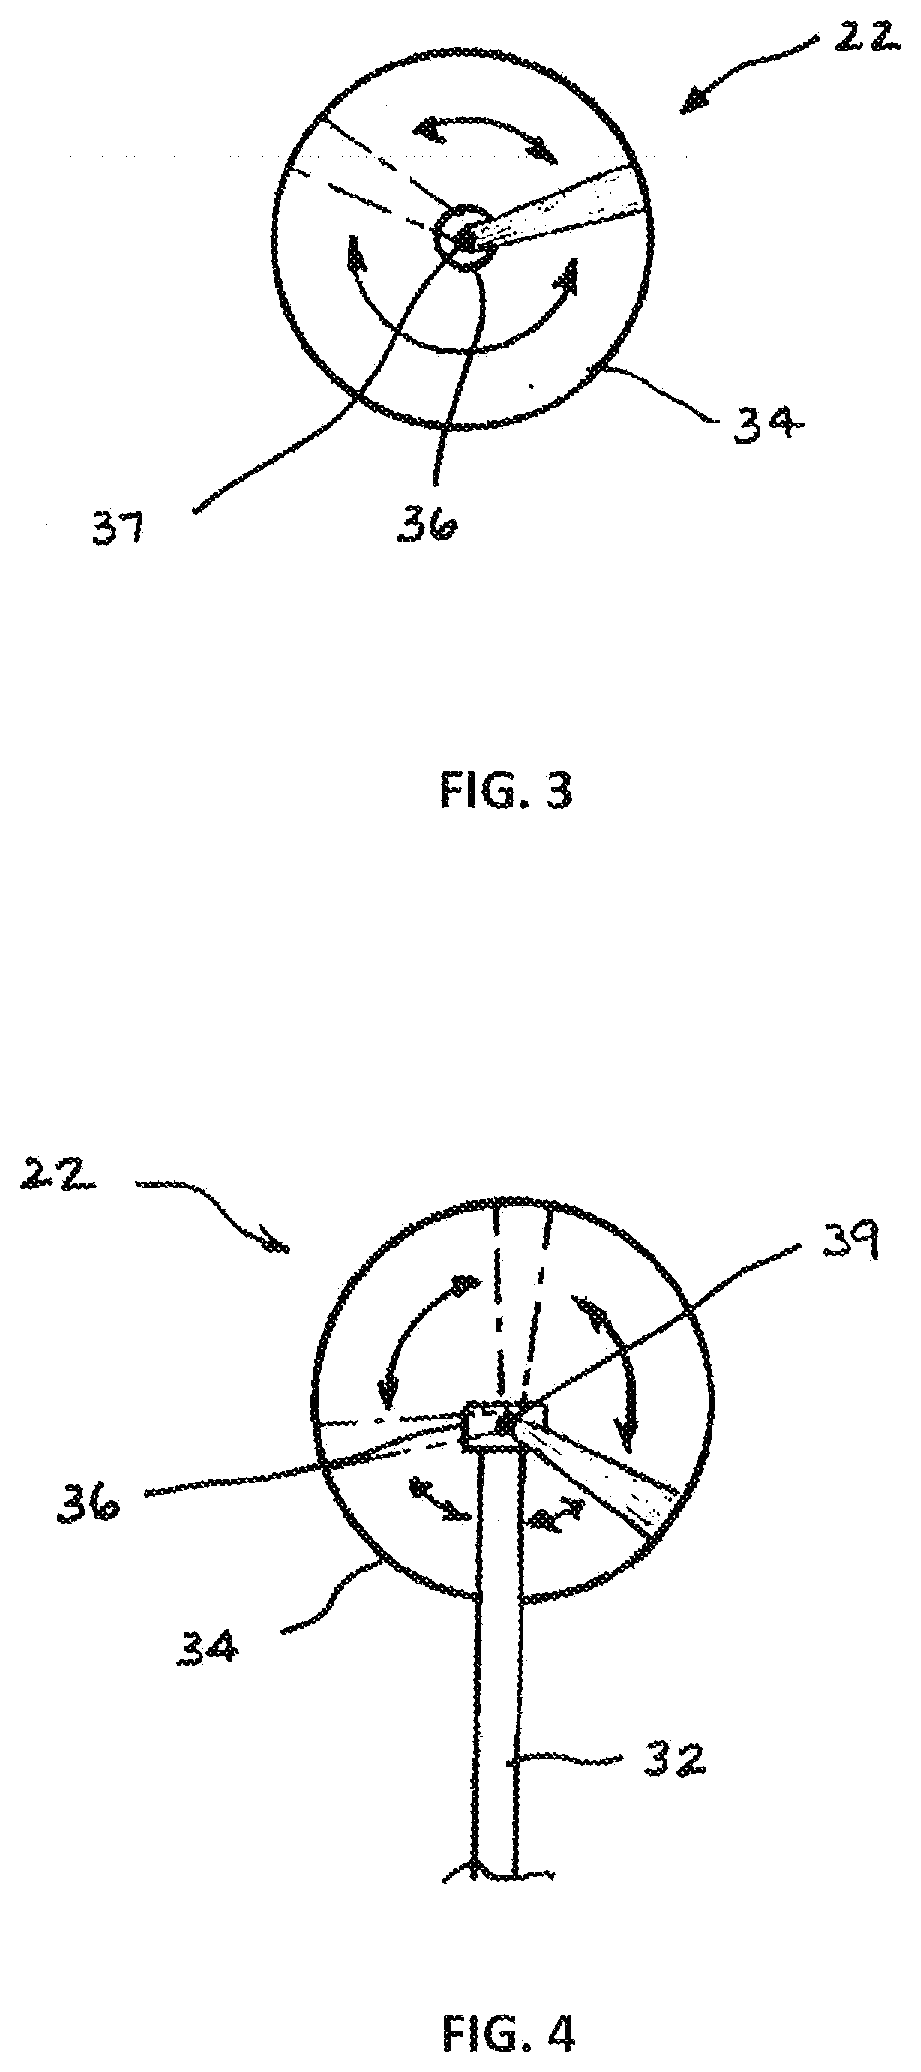 Method and Probe System for Tissue Analysis in a Surgical Cavity in an Intraoperative Procedure